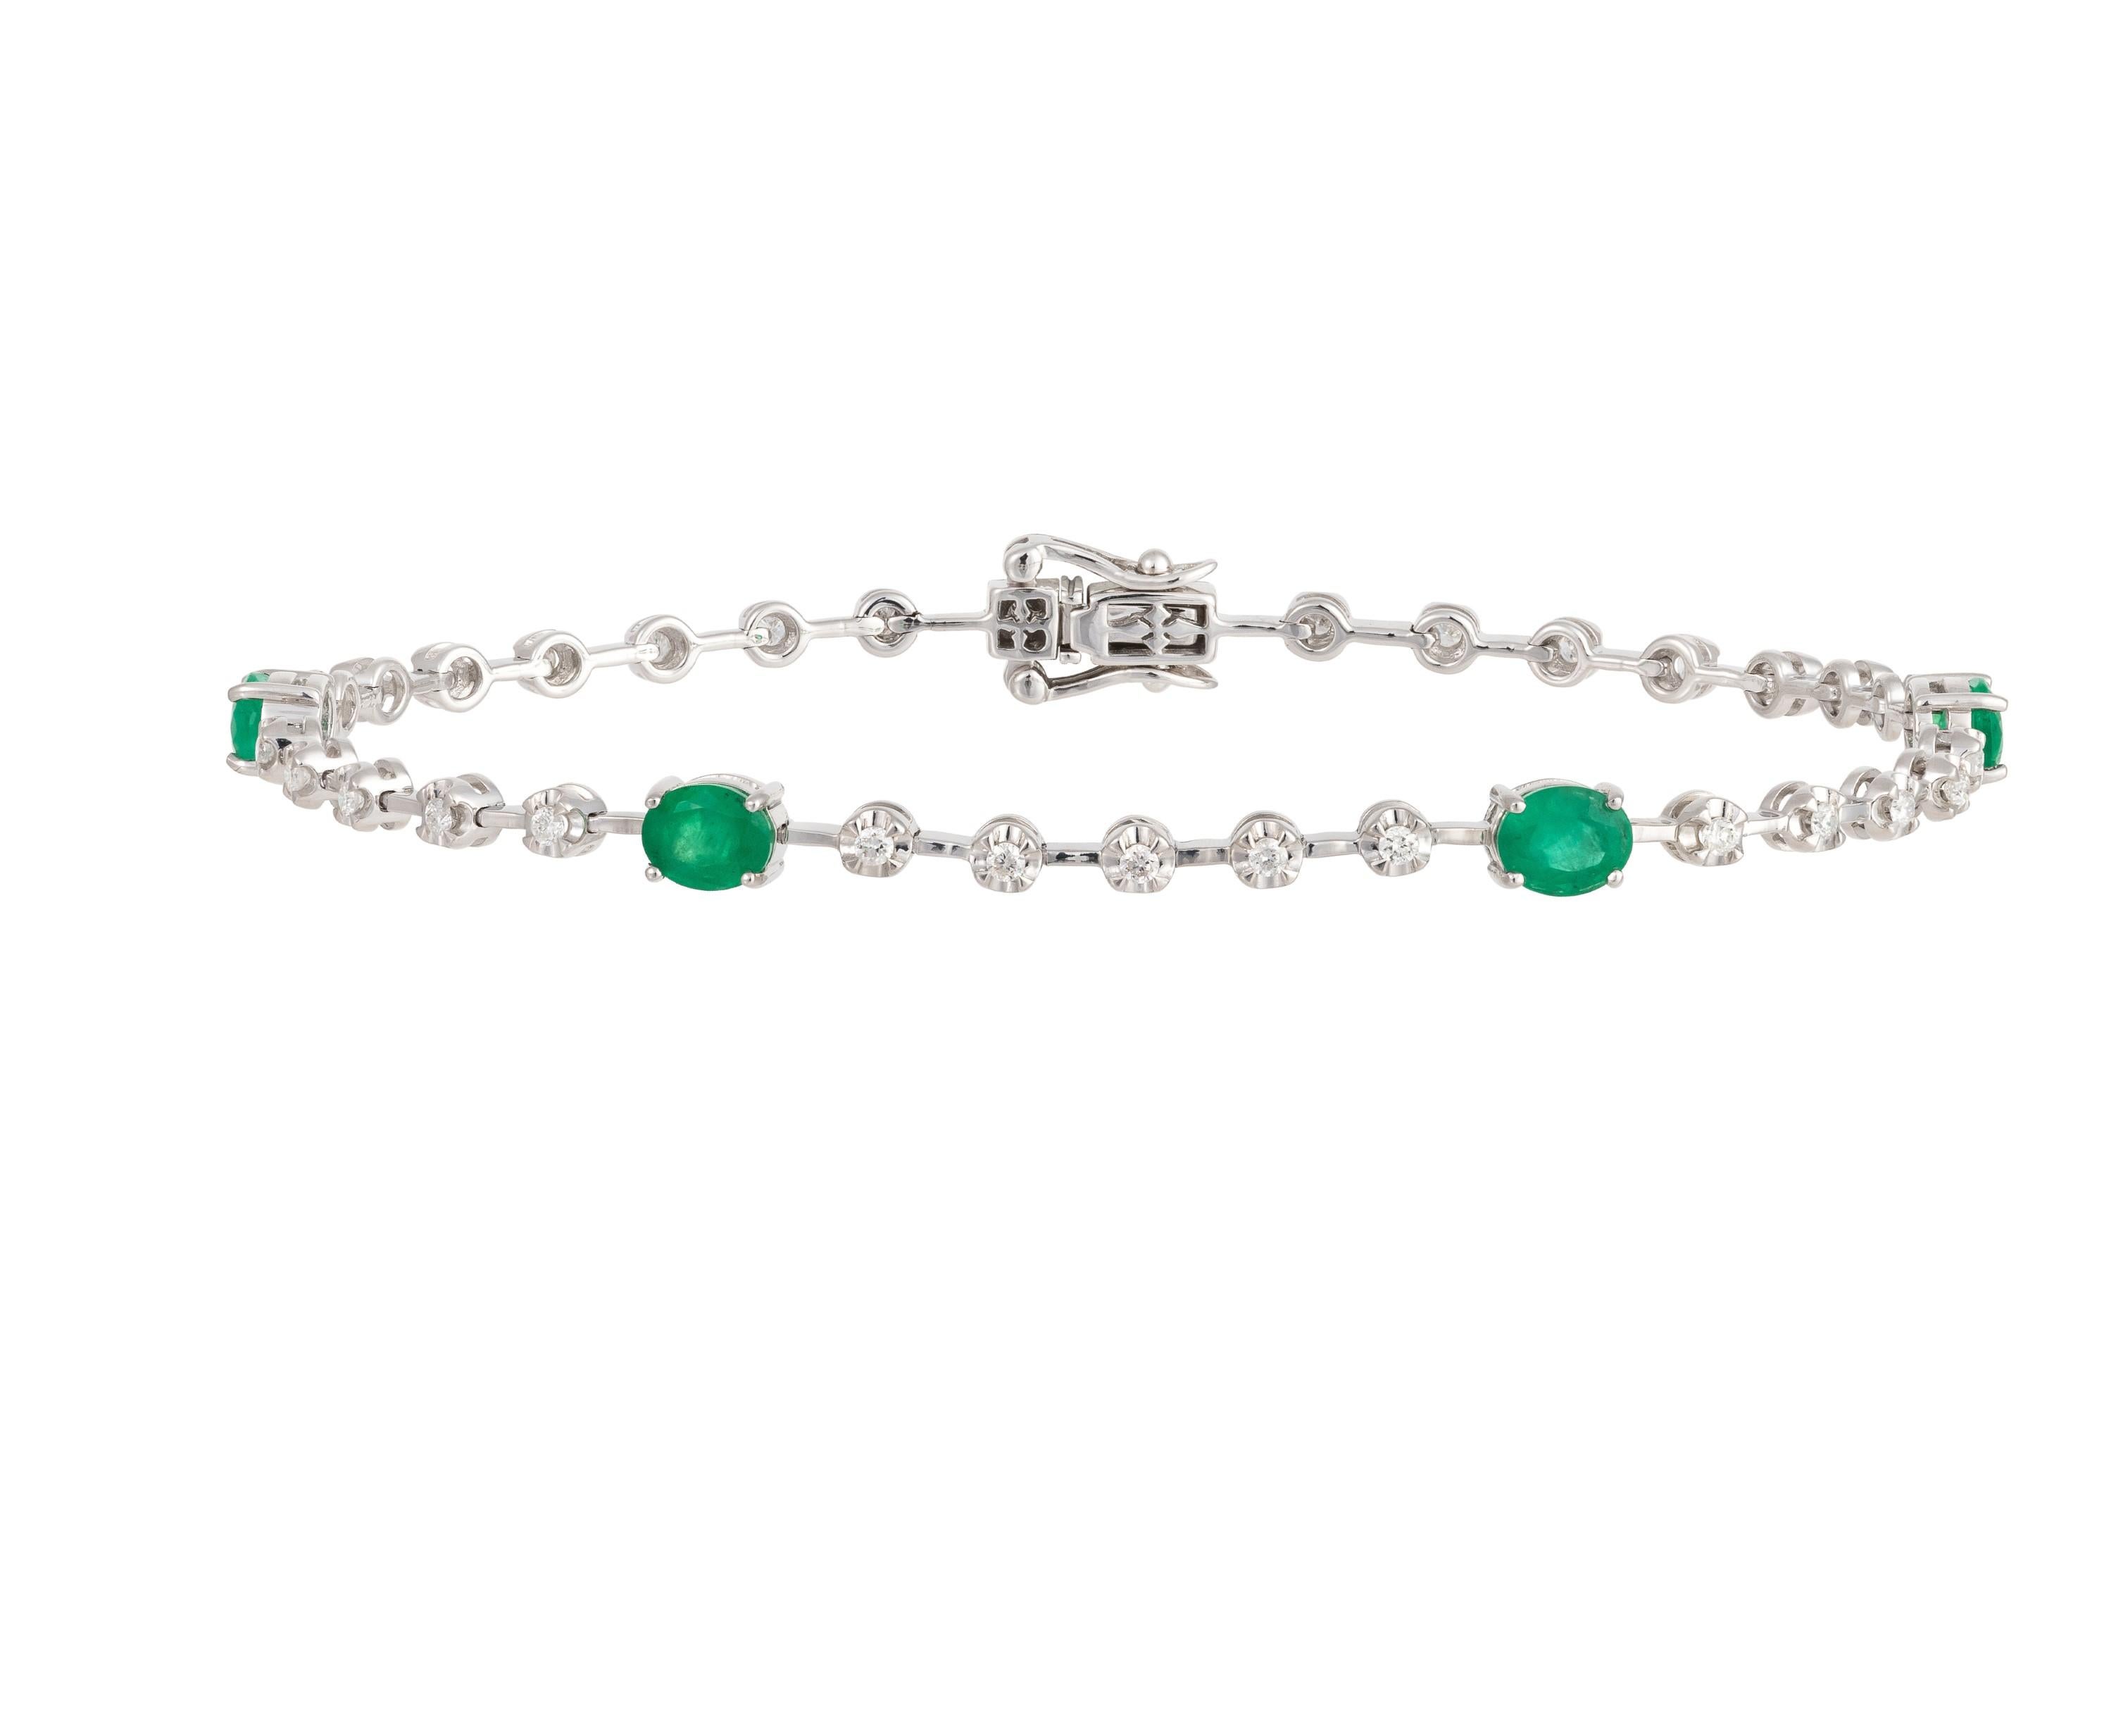 The Following Items we are offering is a Pair of Rare 18KT Gold Oval Shaped Emerald Diamond Bracelet. Bracelet is comprised of Finely Set Gorgeous Glittering Diamonds and 4 Large Gorgeous Oval Shaped Emeralds!!! T.C.W. Approx 2CTS. The Emeralds and